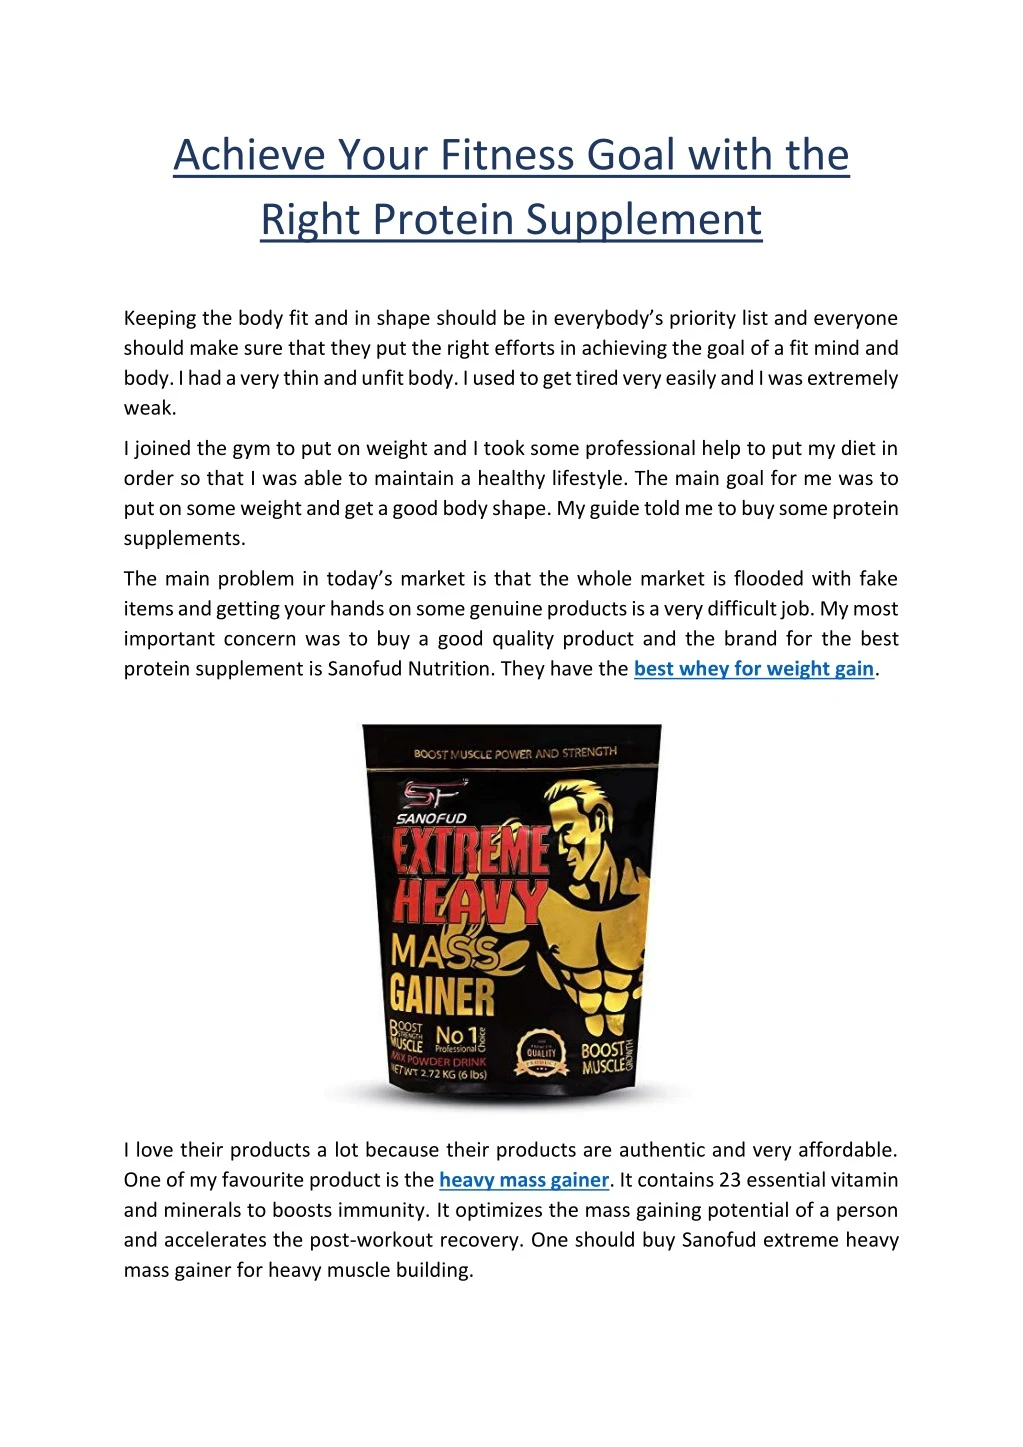 achieve your fitness goal with the right protein